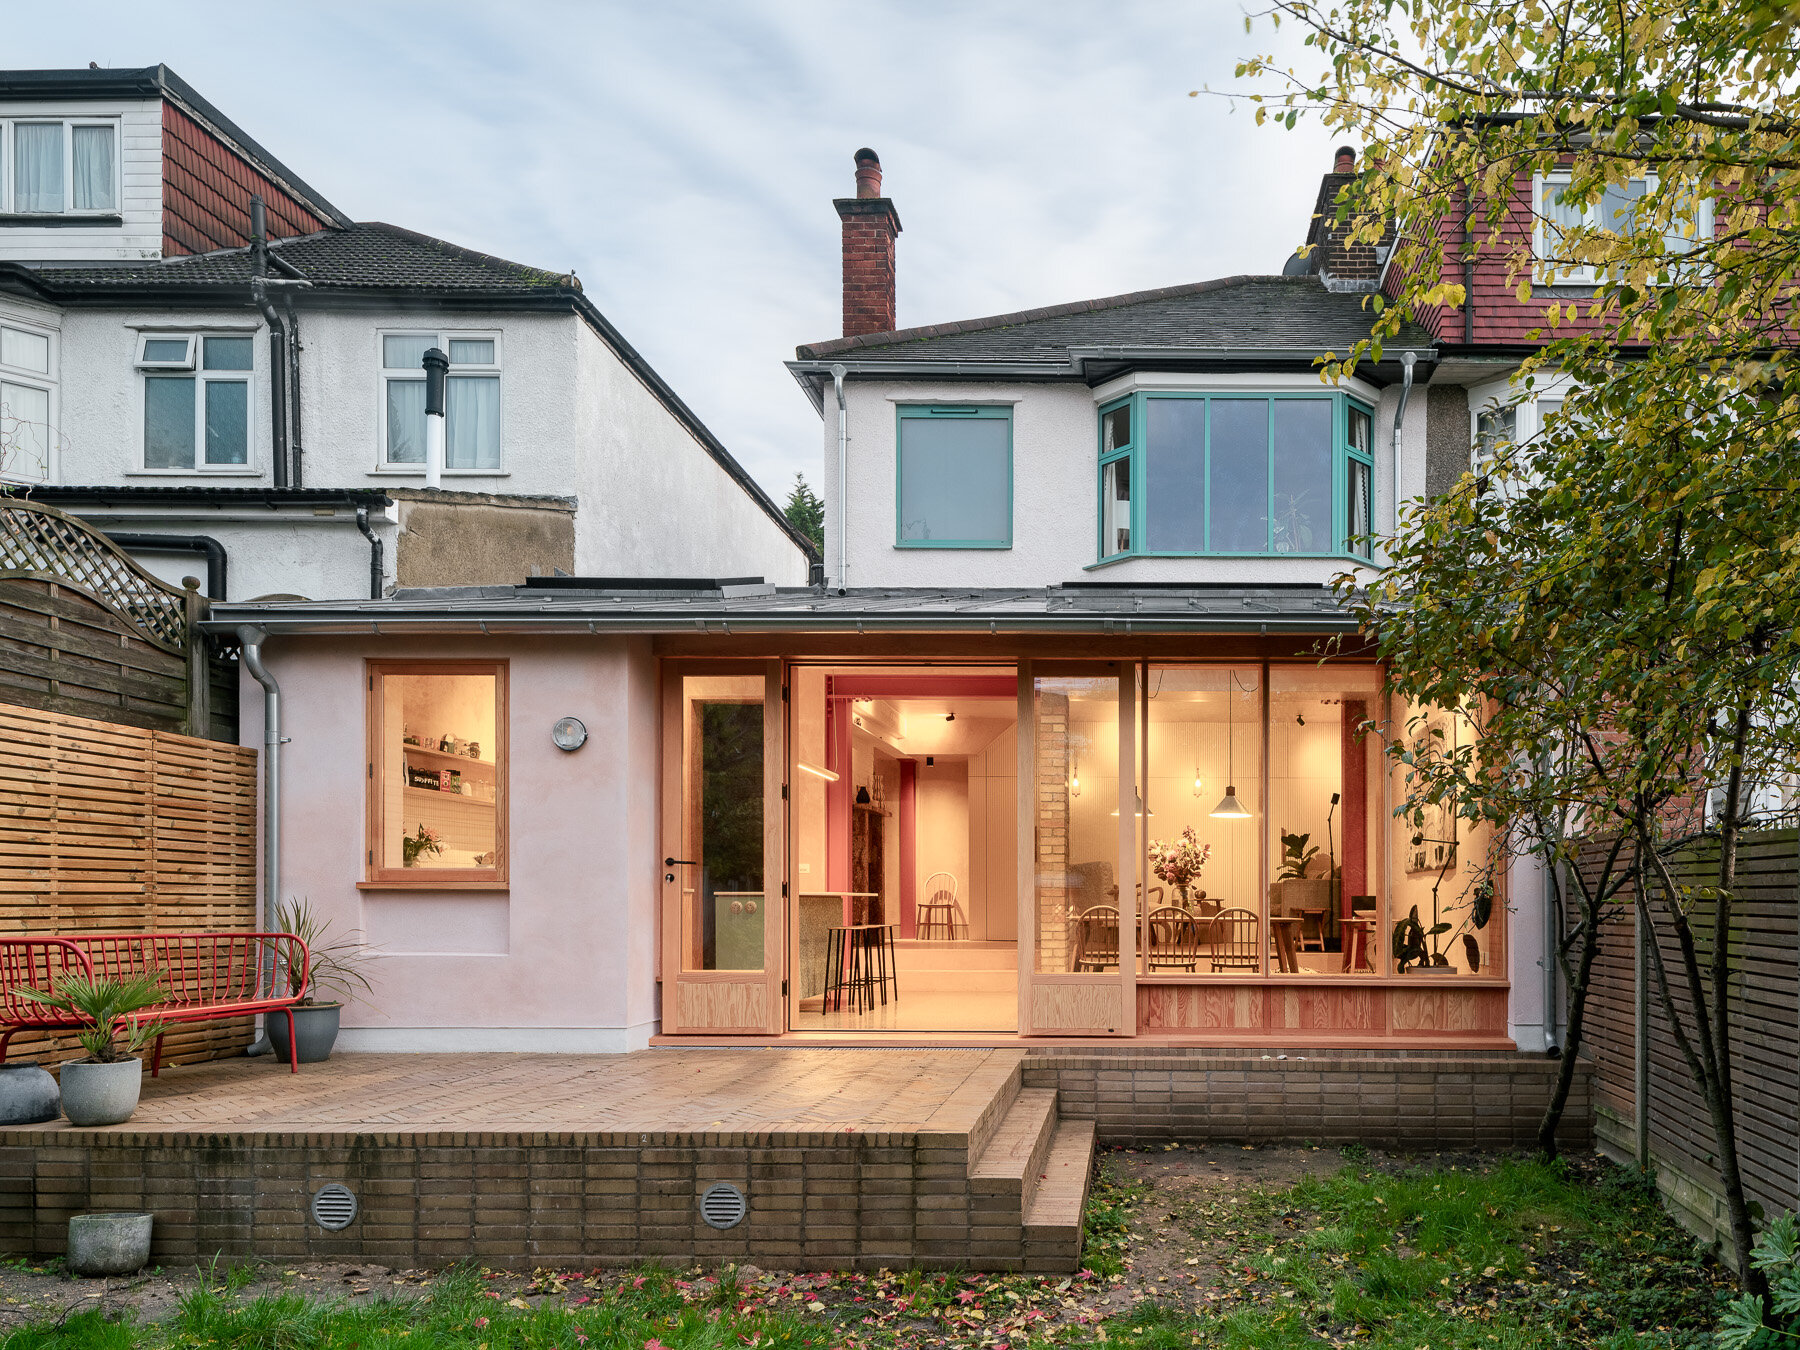 This extension to a interwar semi-detached house in Walthamstow comes to life at dusk when the warm glow of the open plan kitchen, living and dining area illuminates the soft material palette of pinks, reds and timber 💡

📸 @lucap_photos 

#eastlond